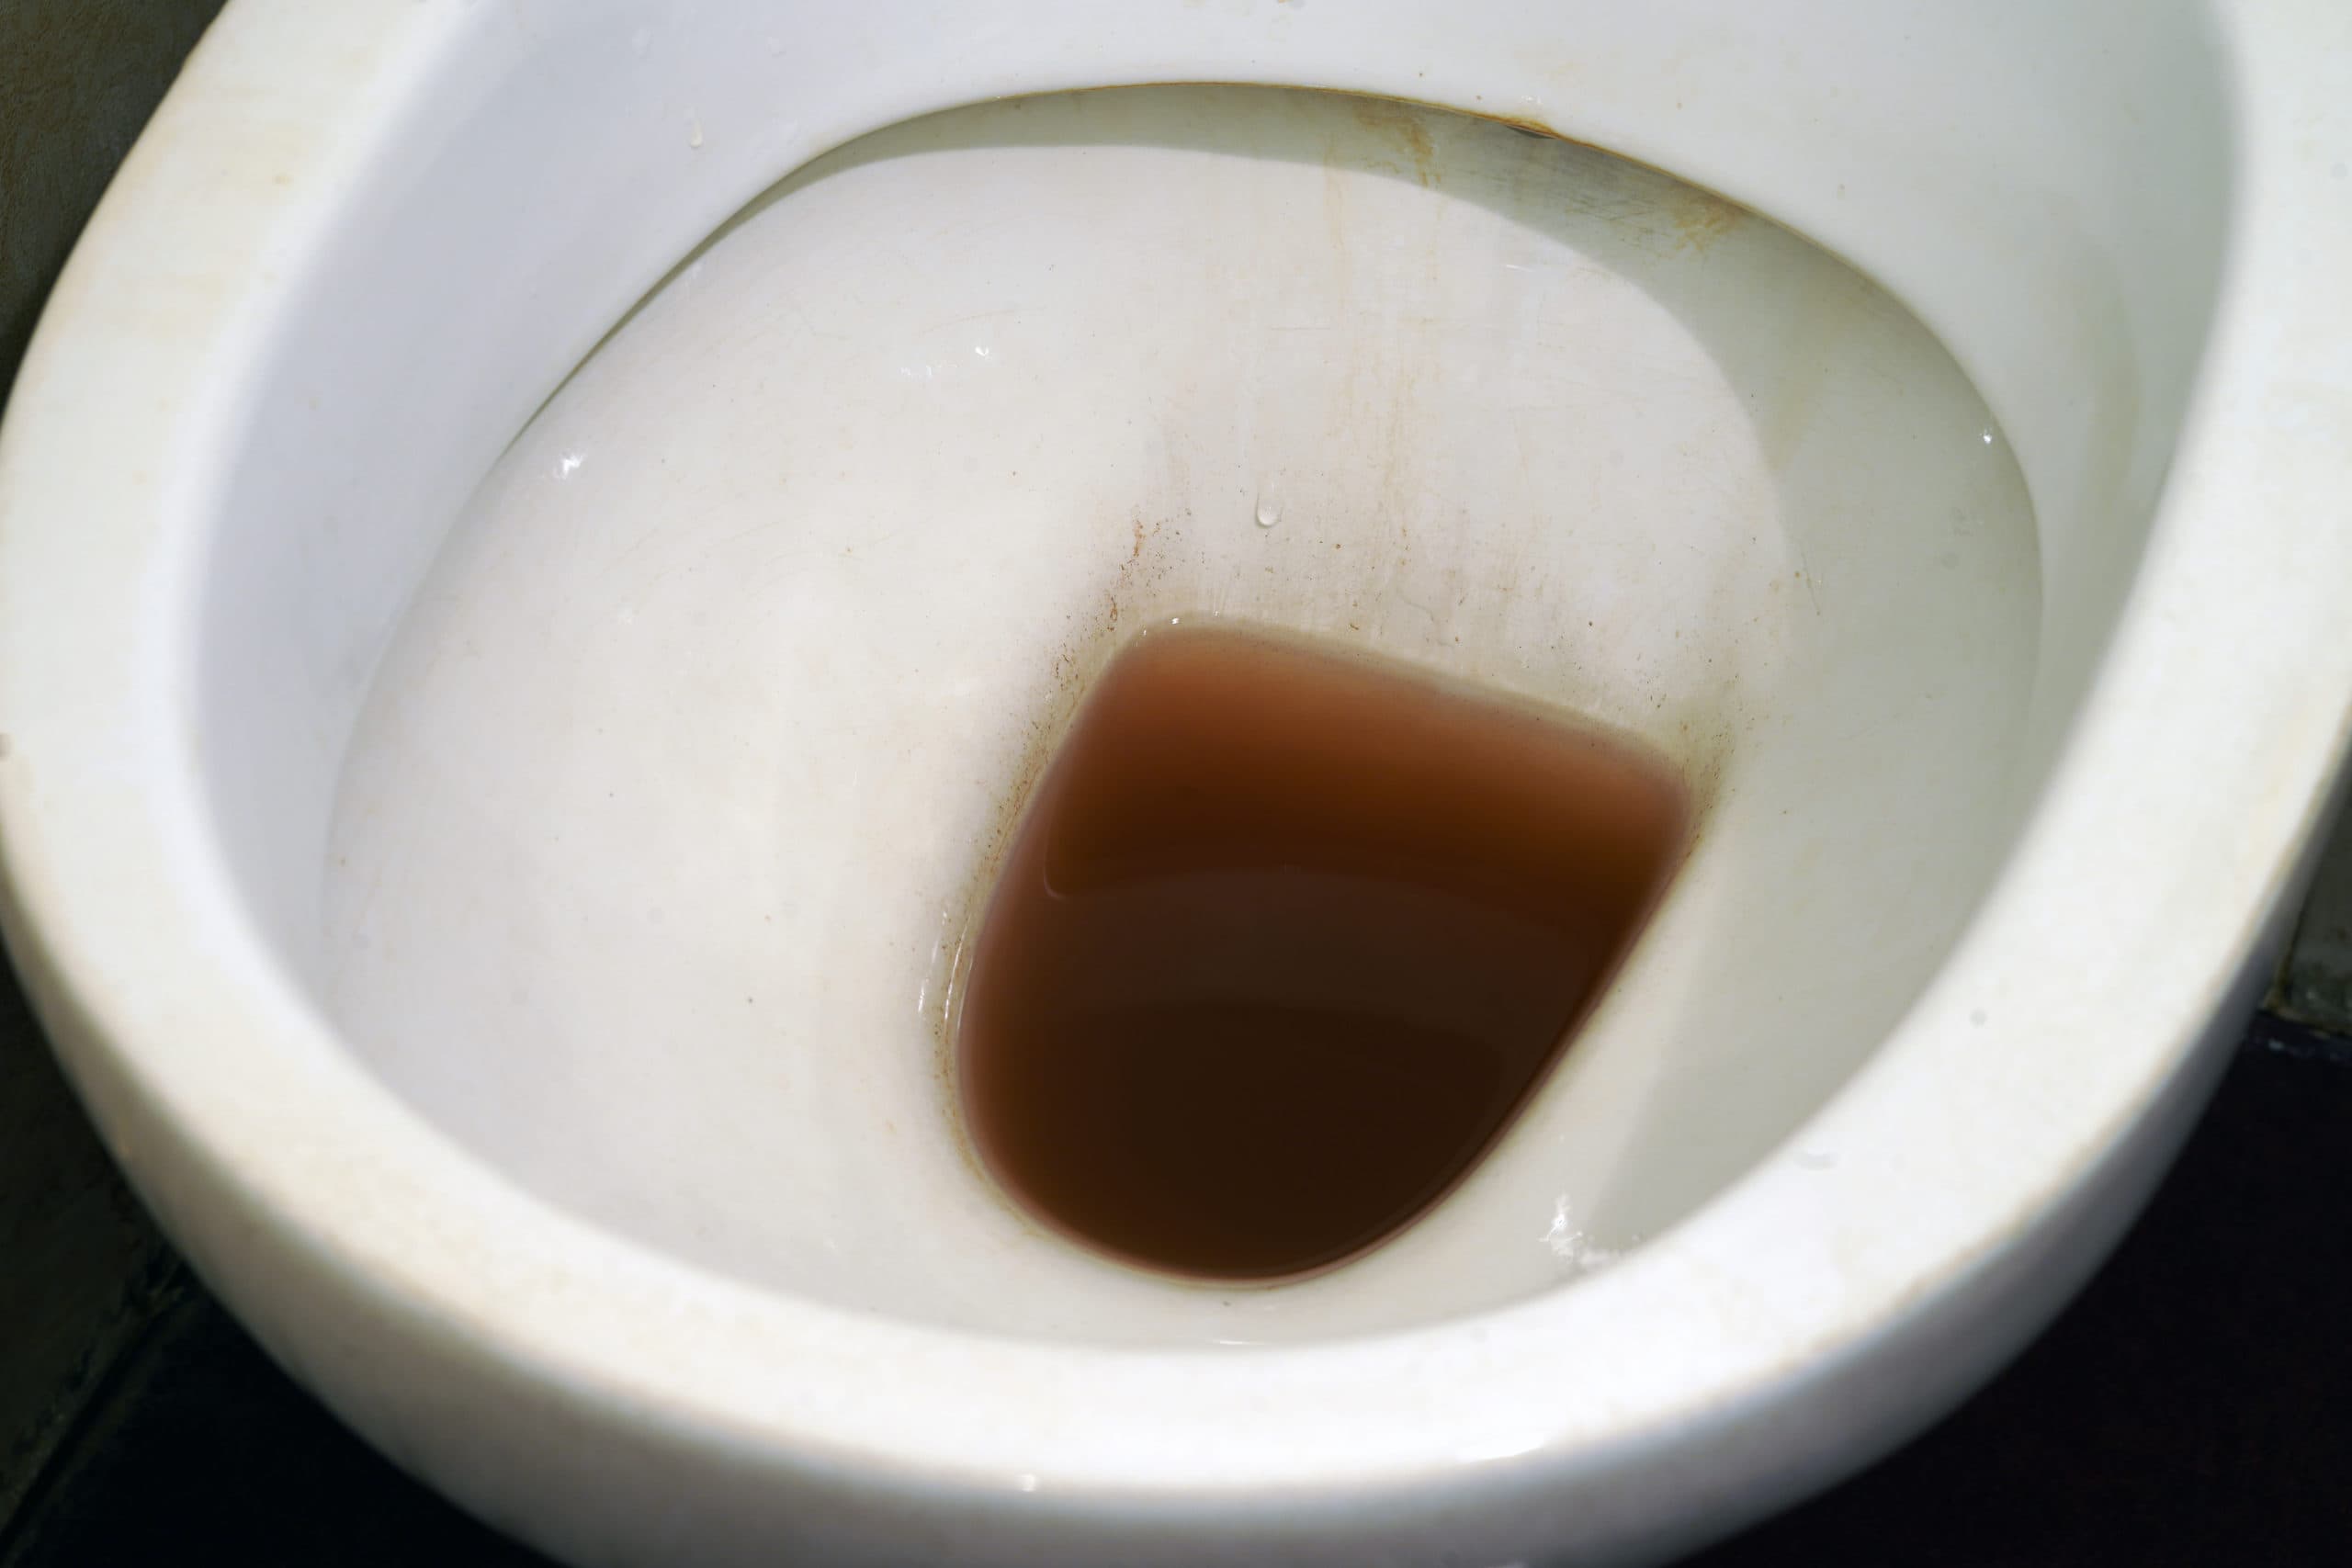 Rusty brown water in the toilet.